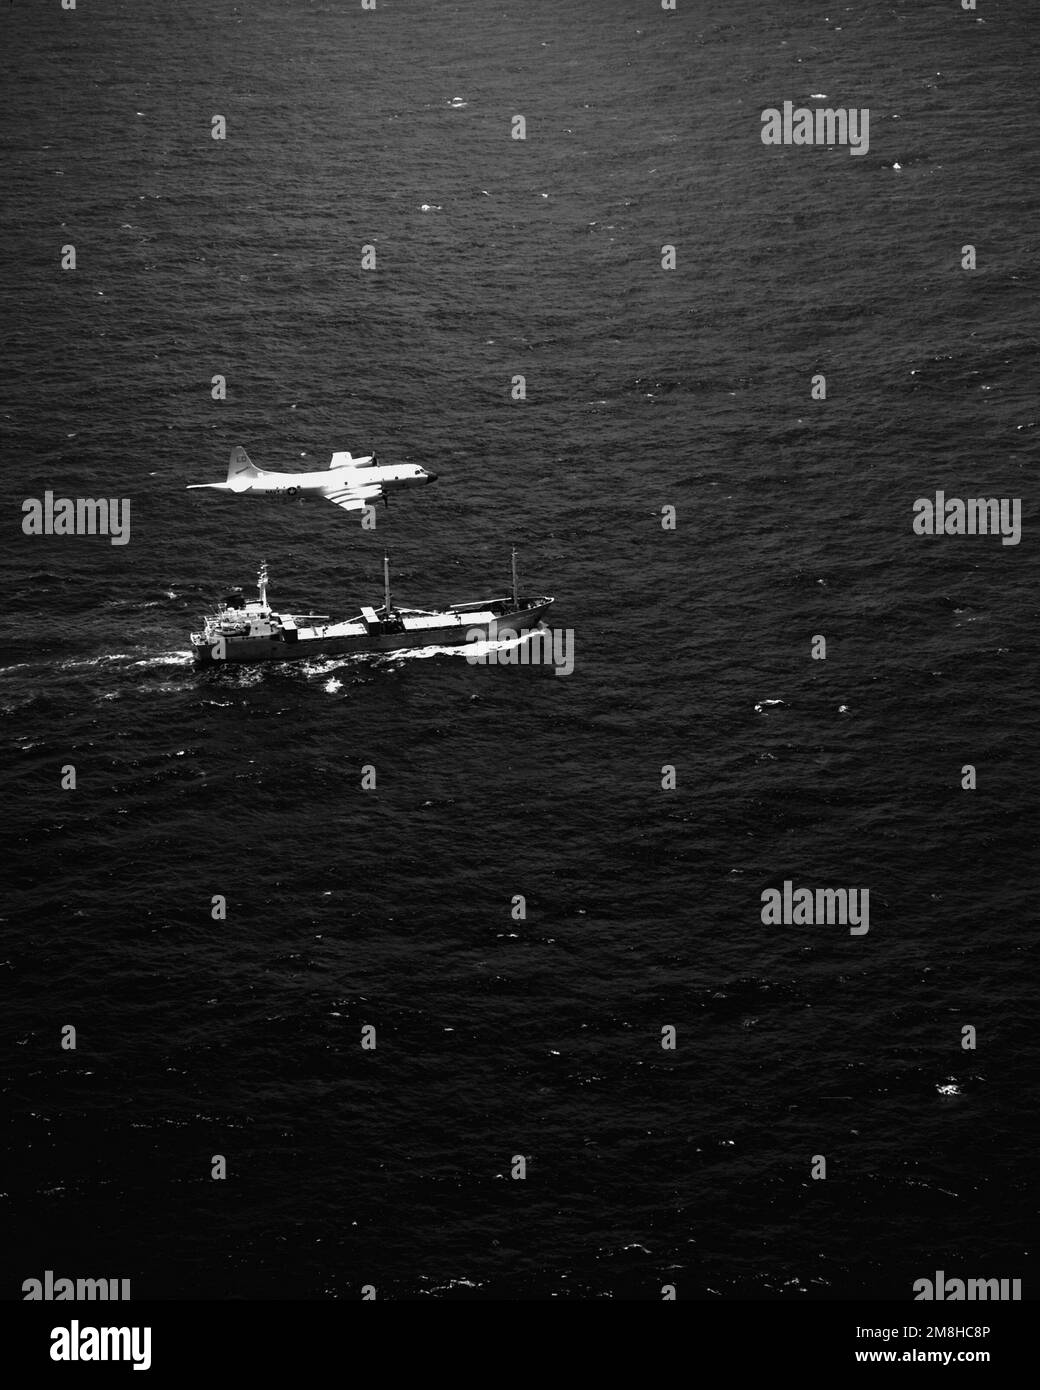 A P-3C Orion aircraft of Patrol Squadron 10 (VP-10) flies over the SS Sea Chariot, a merchant vessel suspected of drug-trafficking activities. Discovered by the patrol squadron's Combat Aircrew Two in the waters southwest of Costa Rica, the ship was found to be carrying II,233 pounds of cocaine when boarded by U.S. Coast Guard personnel. Country: Pacific Ocean (POC) Stock Photo